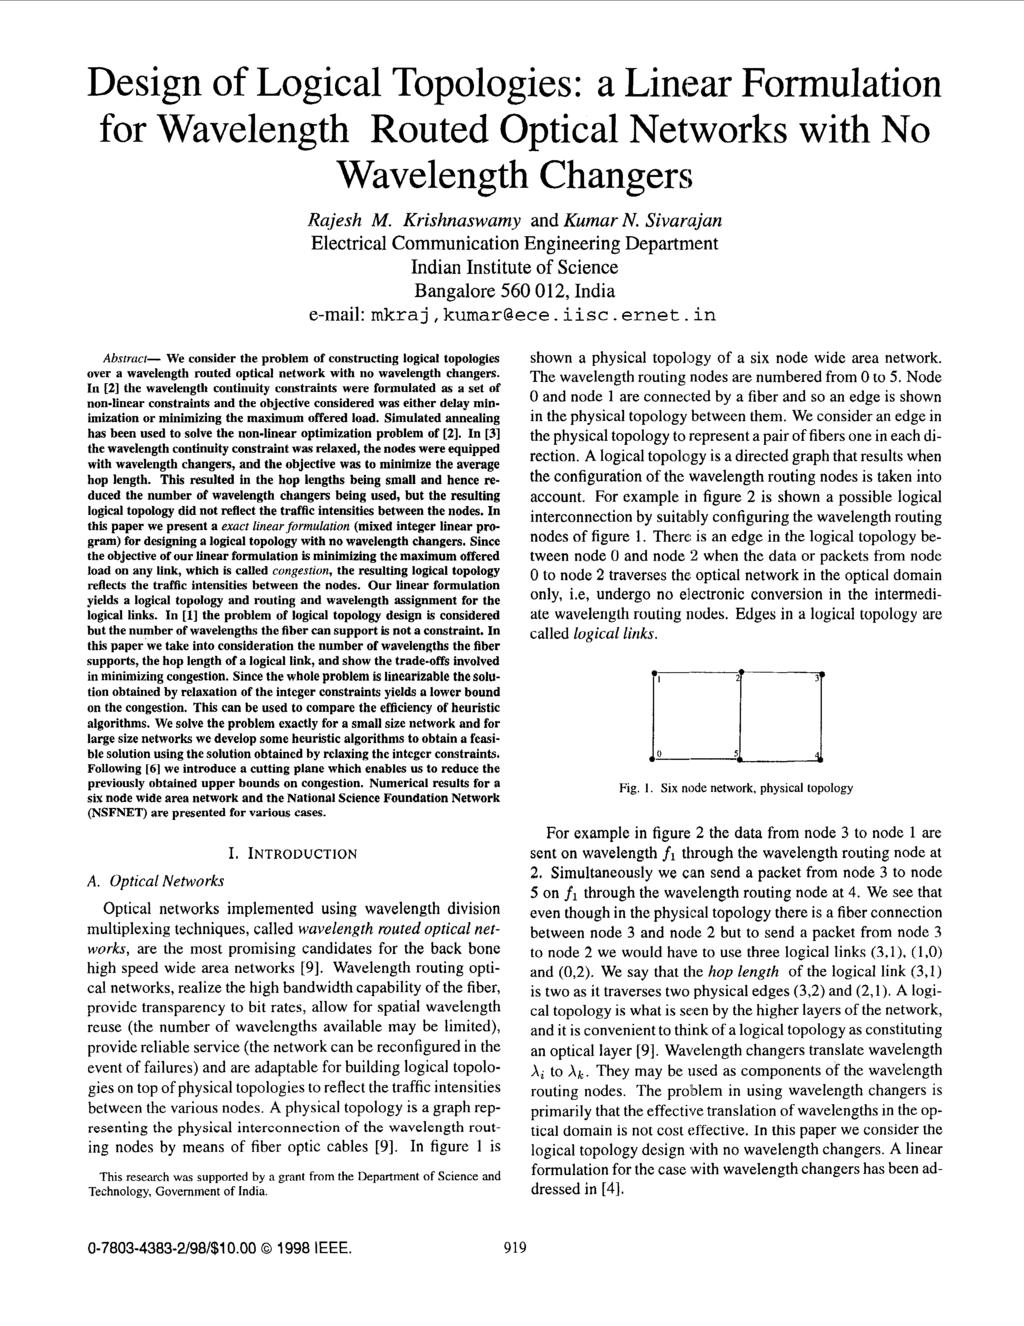 Design of Logical Topologies: a Linear Formulation for Wavelength Routed Optical Networks with No Wavelength Changers; Rujesh M. Krishnaswamy and Kumur N.